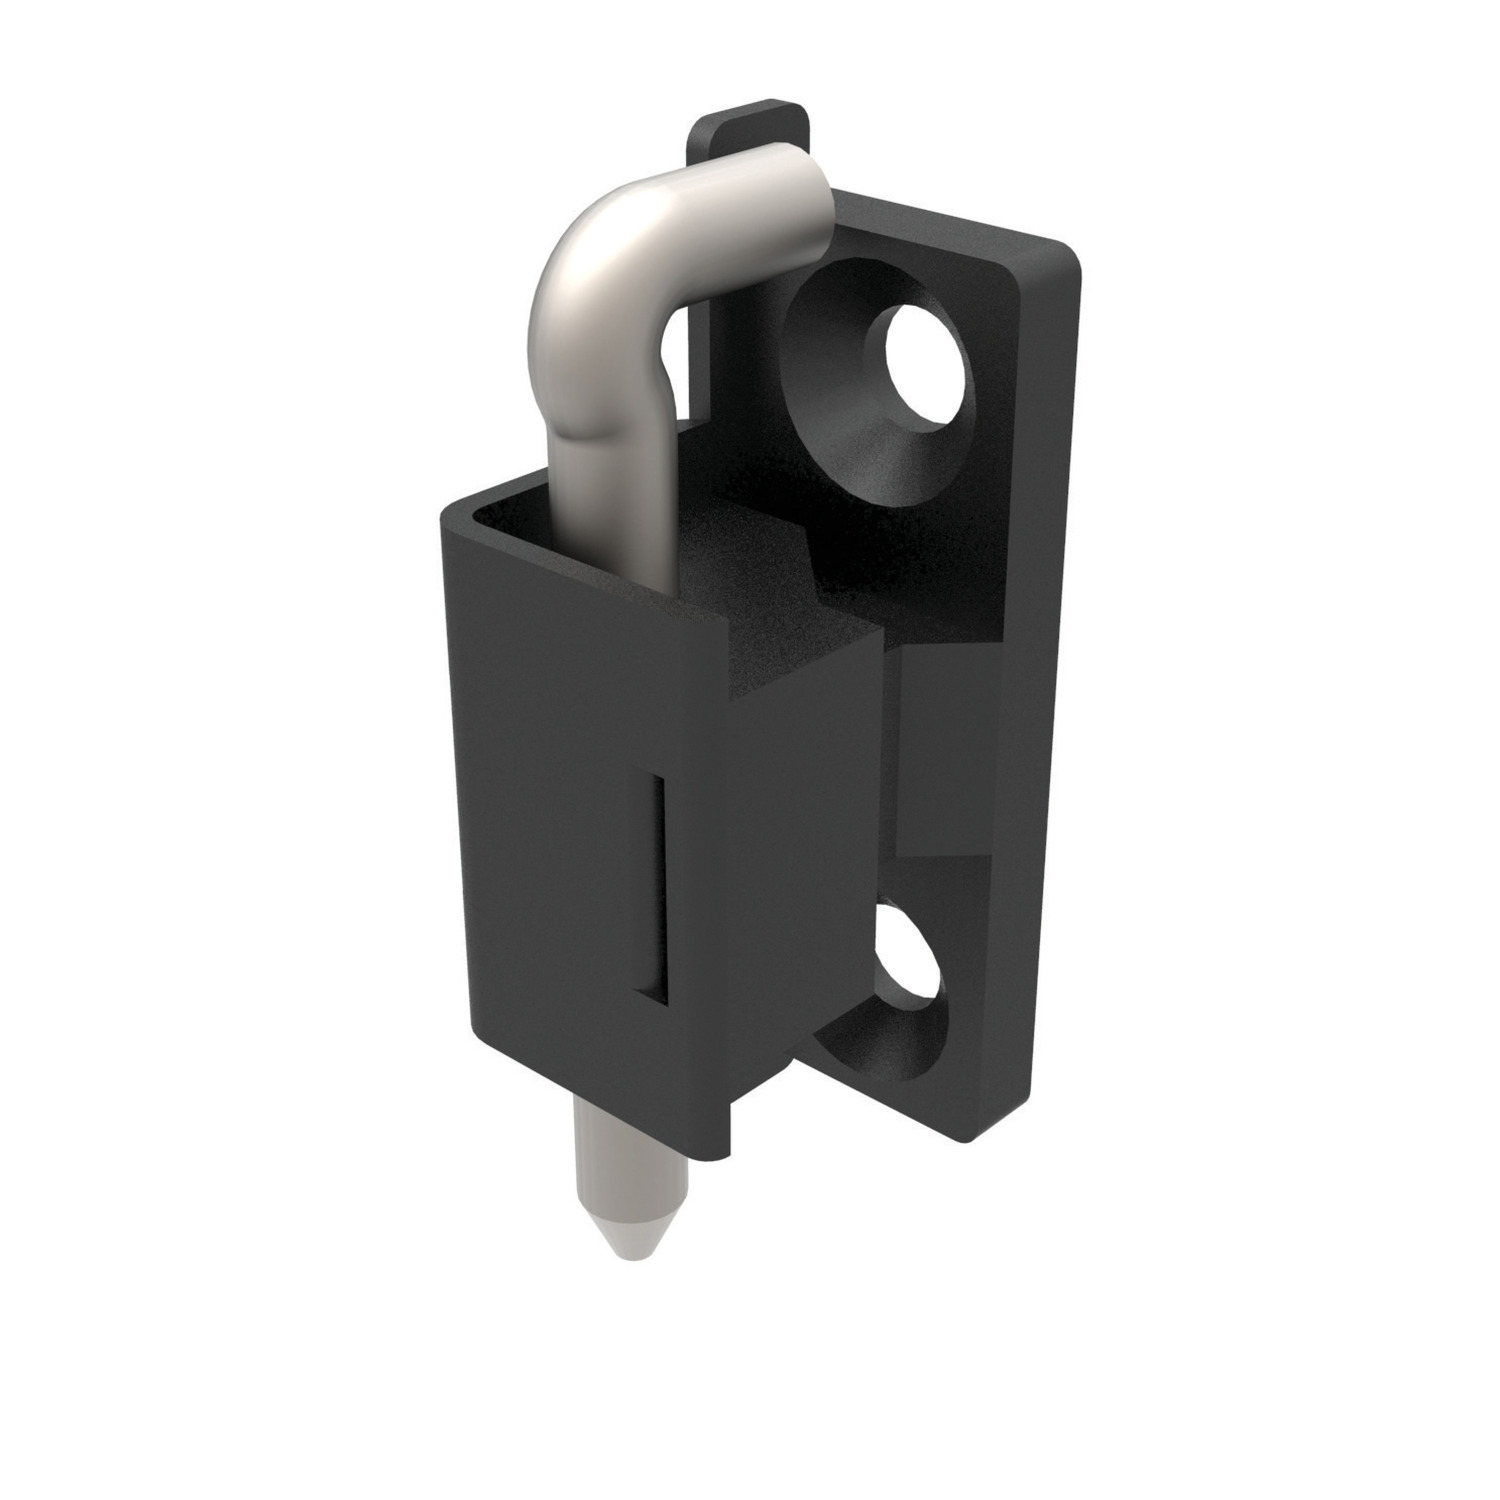 Corner Hinge - 24mm Door Return Cut out and countersunk screw. Black coated. For sure metal enclosures with a 24mm frame off-set.